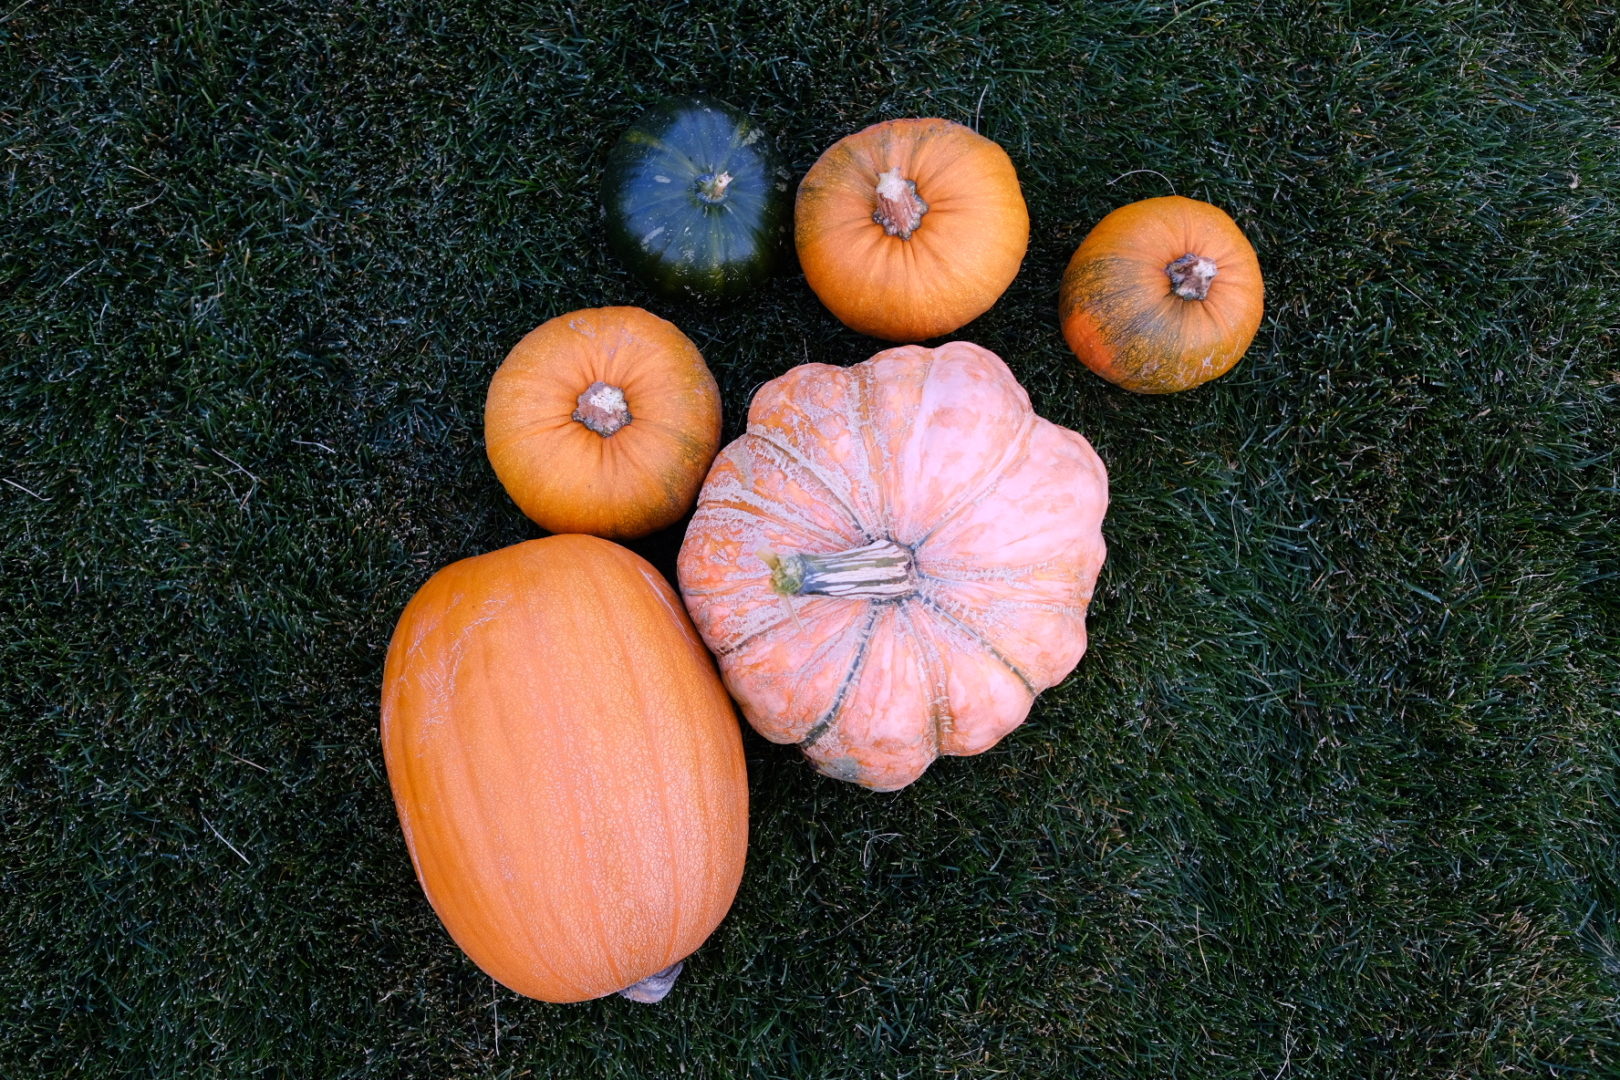 Several pumpkins sitting on the lawn.